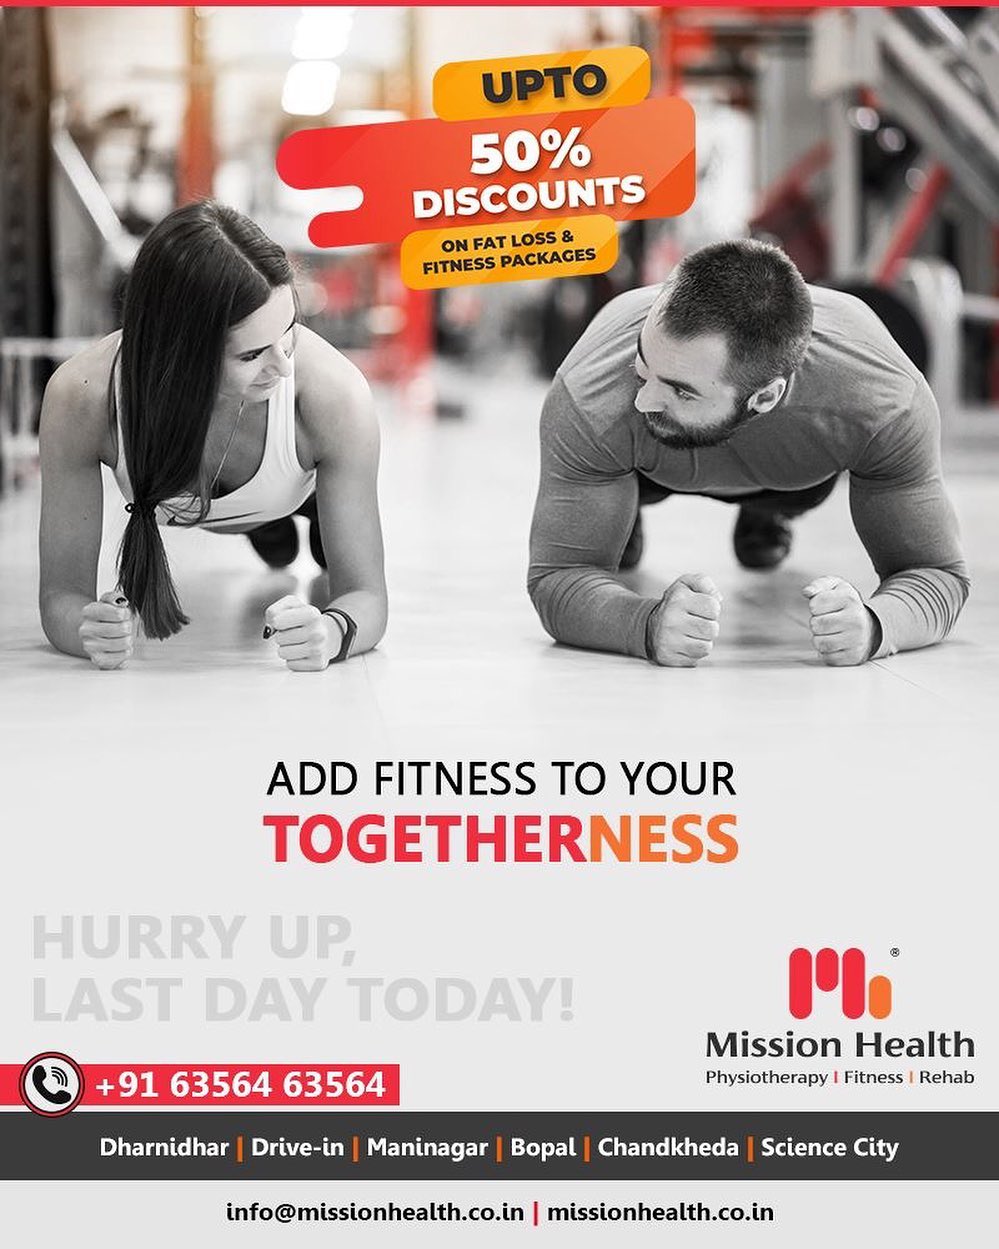 Add Fitness To Your Togetherness and Grow Fit Together. 
UpTo 50% Off on Various Fat Loss & Fitness Packages

Visit your nearest Mission Health Fitness Boutique to enroll and march towards your fitness goals with Mission Health.
Hurry up, Last day today!

Call: +916356463564
Visit: www.missionhealth.co.in

#valentinefitnessoffer #exercise #exercises #fitnessexperts #fitnessexpert #fitnessteam #gymoholic #winterworkouts #fitness #winterfitness #befit #gymoffers #fitnessoffers #goslim #MissionHealth #MissionHealthIndia #MovementIsLife